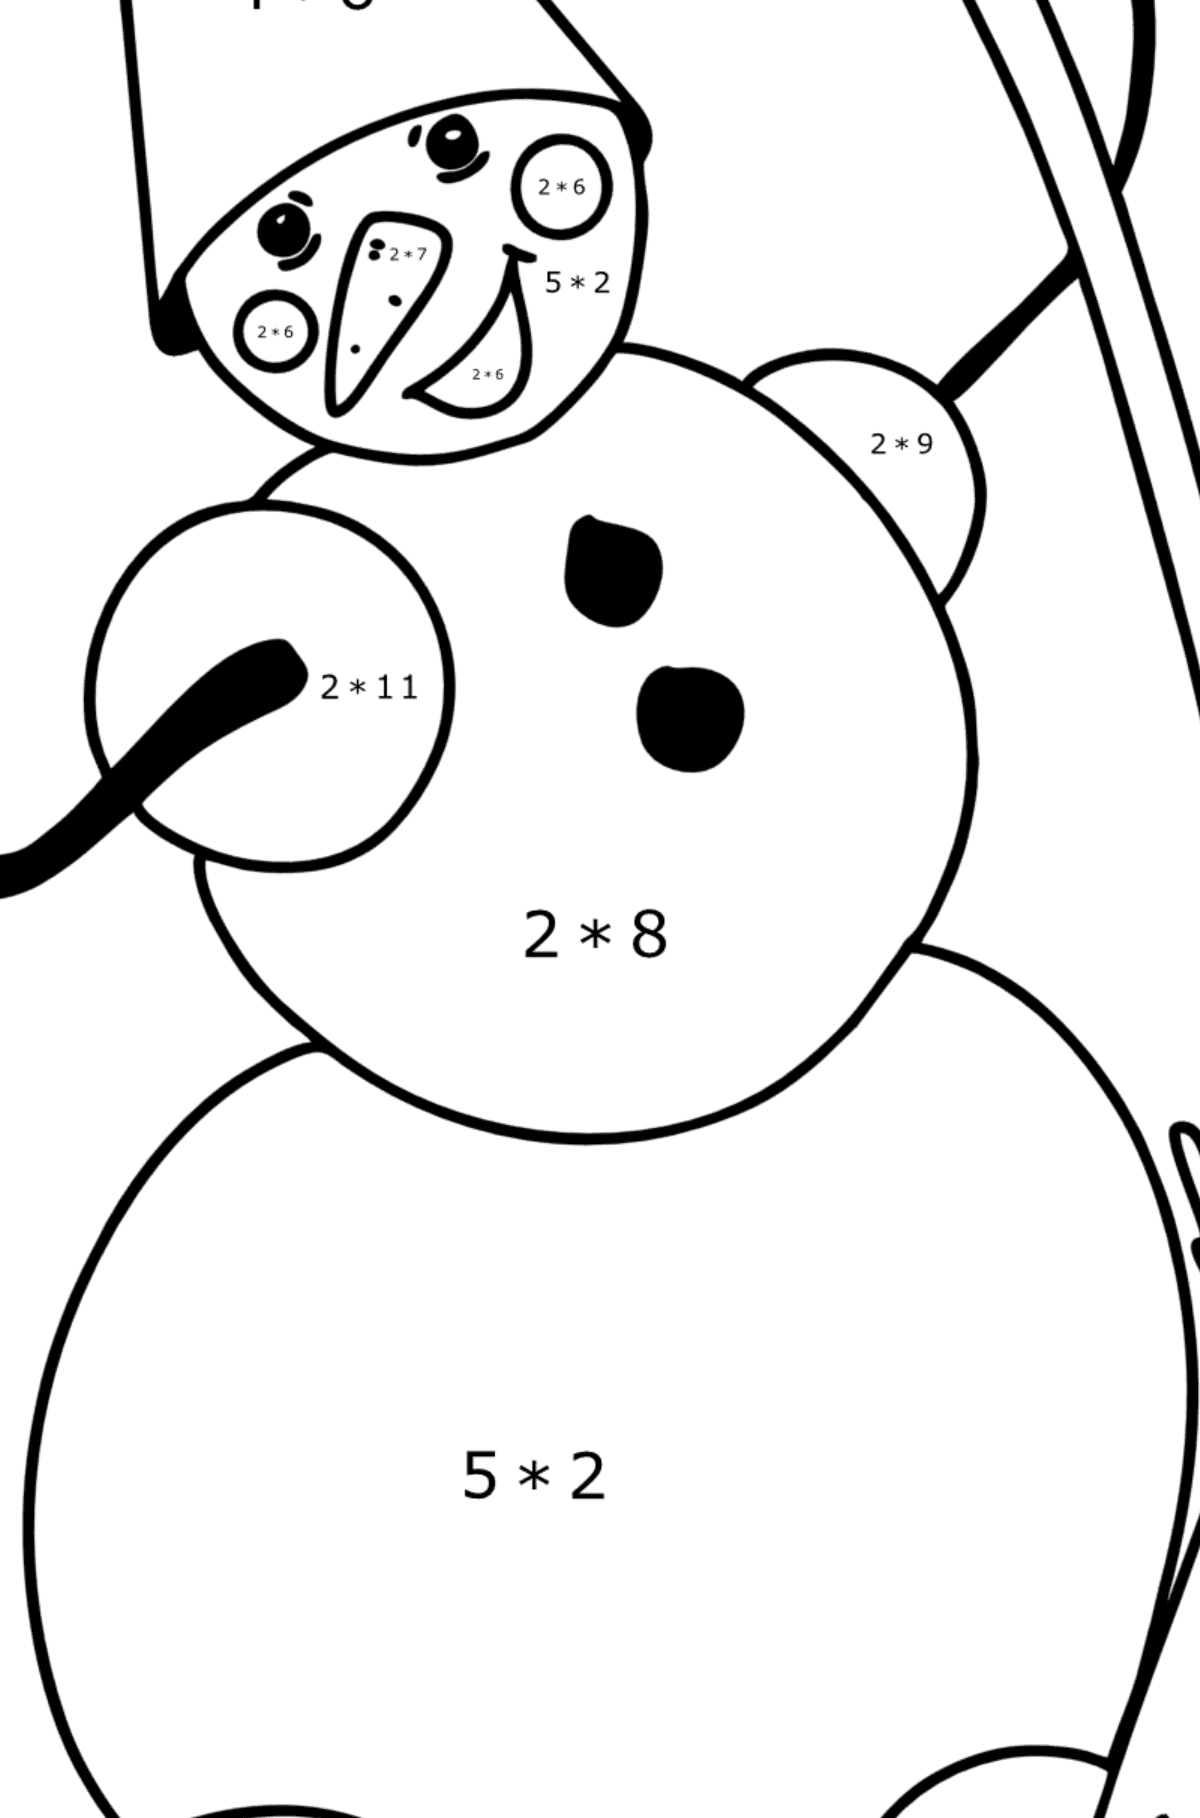 Witty snowman coloring book for kids 5 6